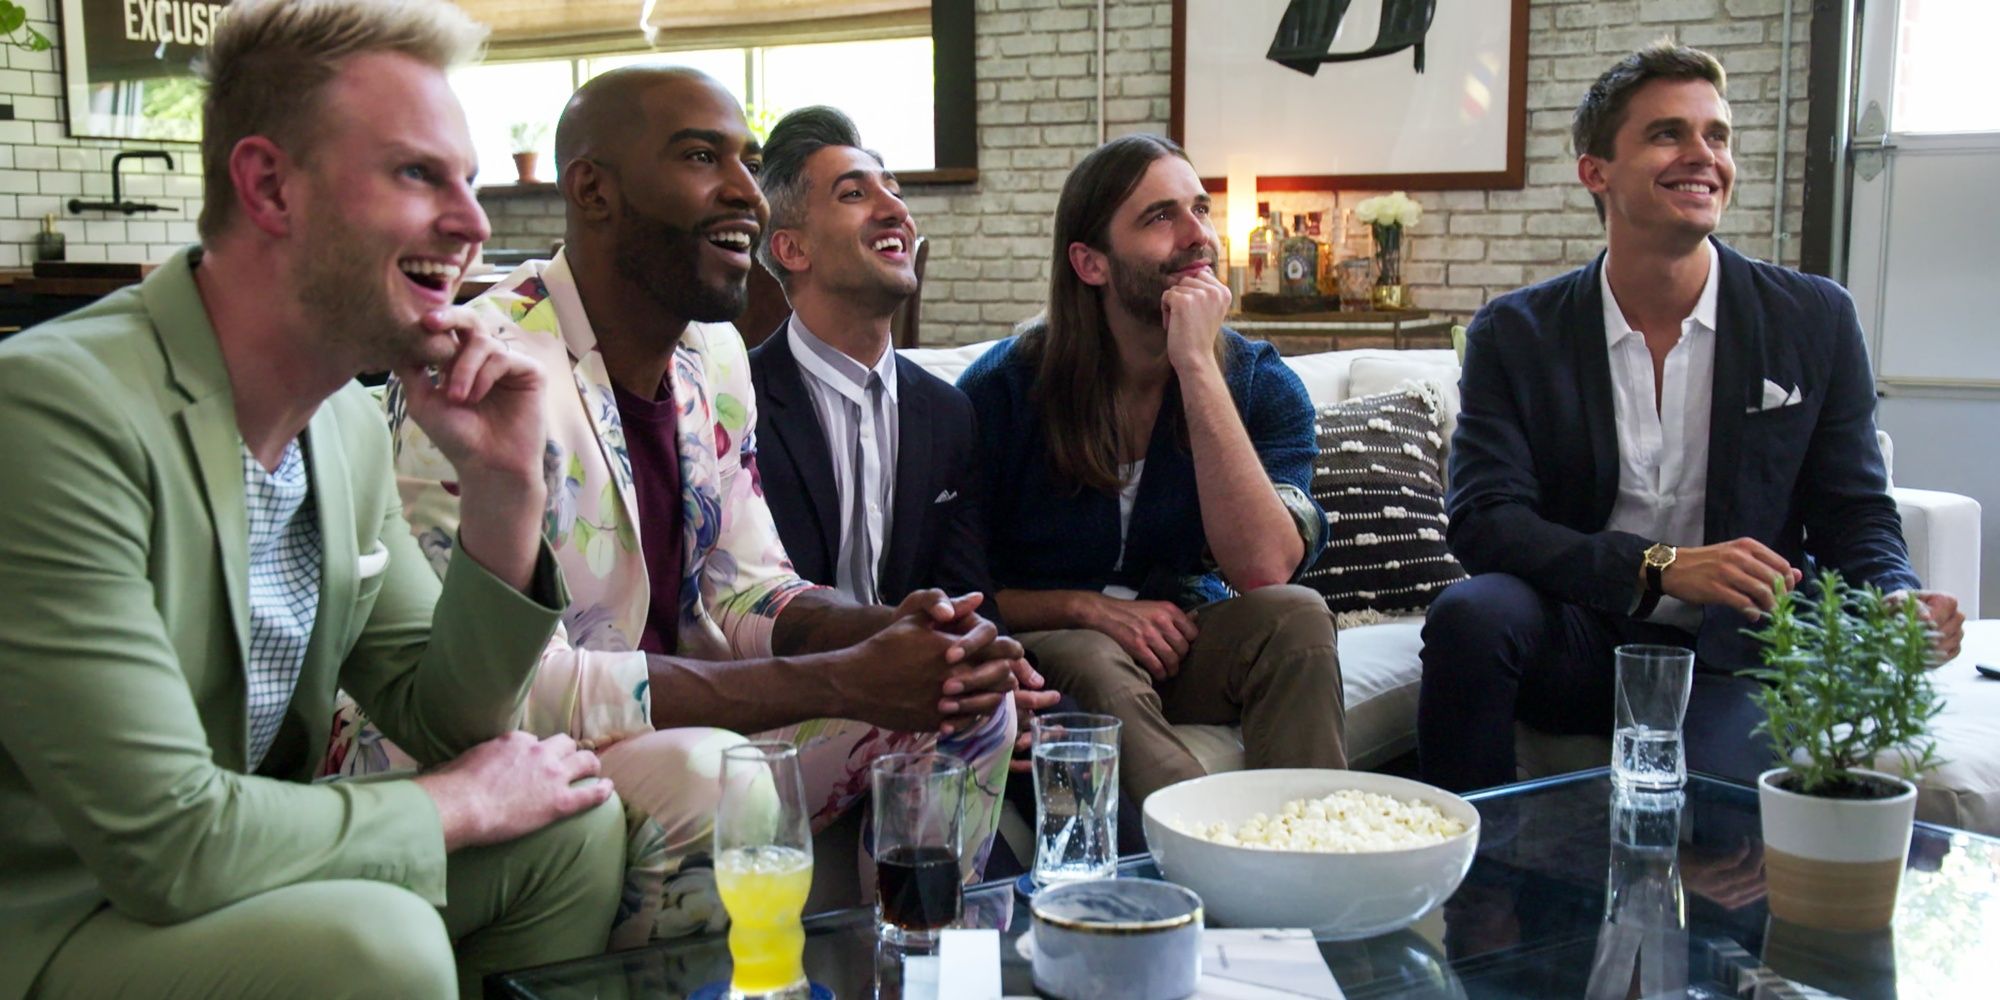 Yas Queen 10 Greatest Episodes Of Netflixs Queer Eye (According To IMDb)